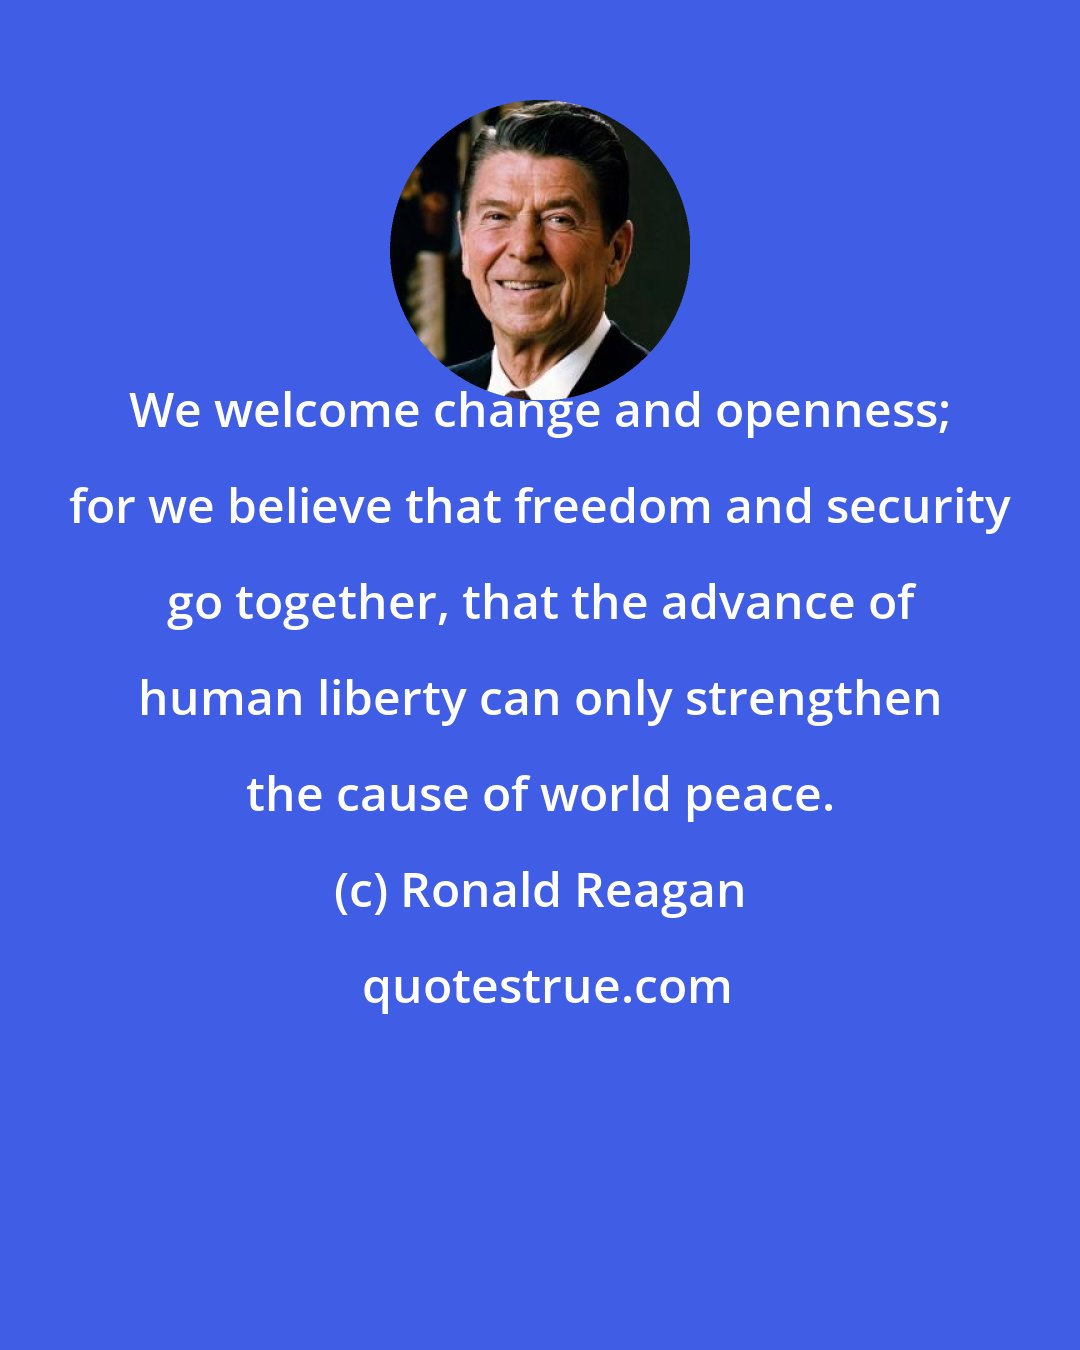 Ronald Reagan: We welcome change and openness; for we believe that freedom and security go together, that the advance of human liberty can only strengthen the cause of world peace.